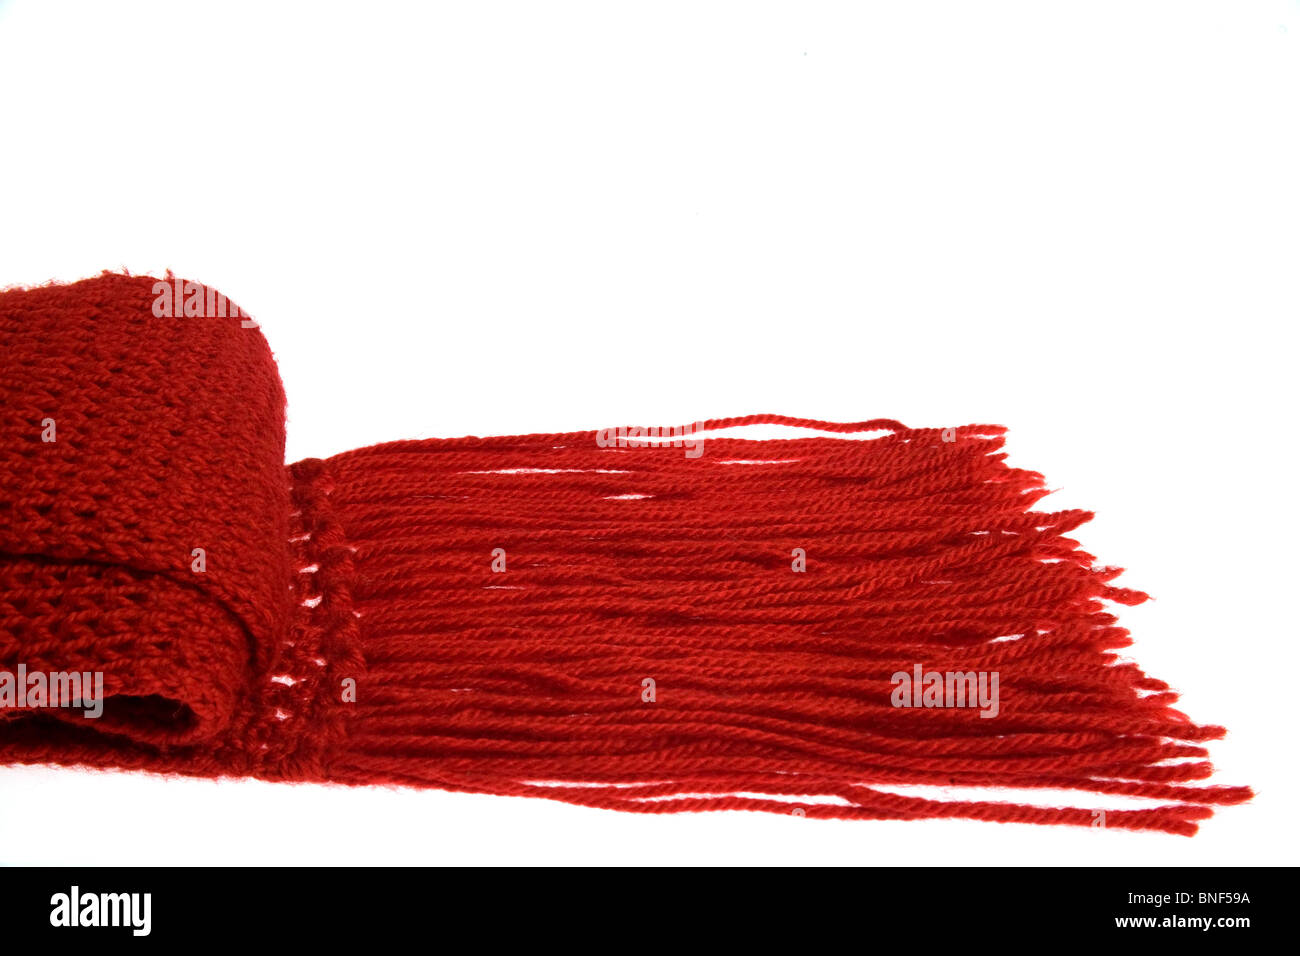 A woolen red scarf with long fringes. Stock Photo